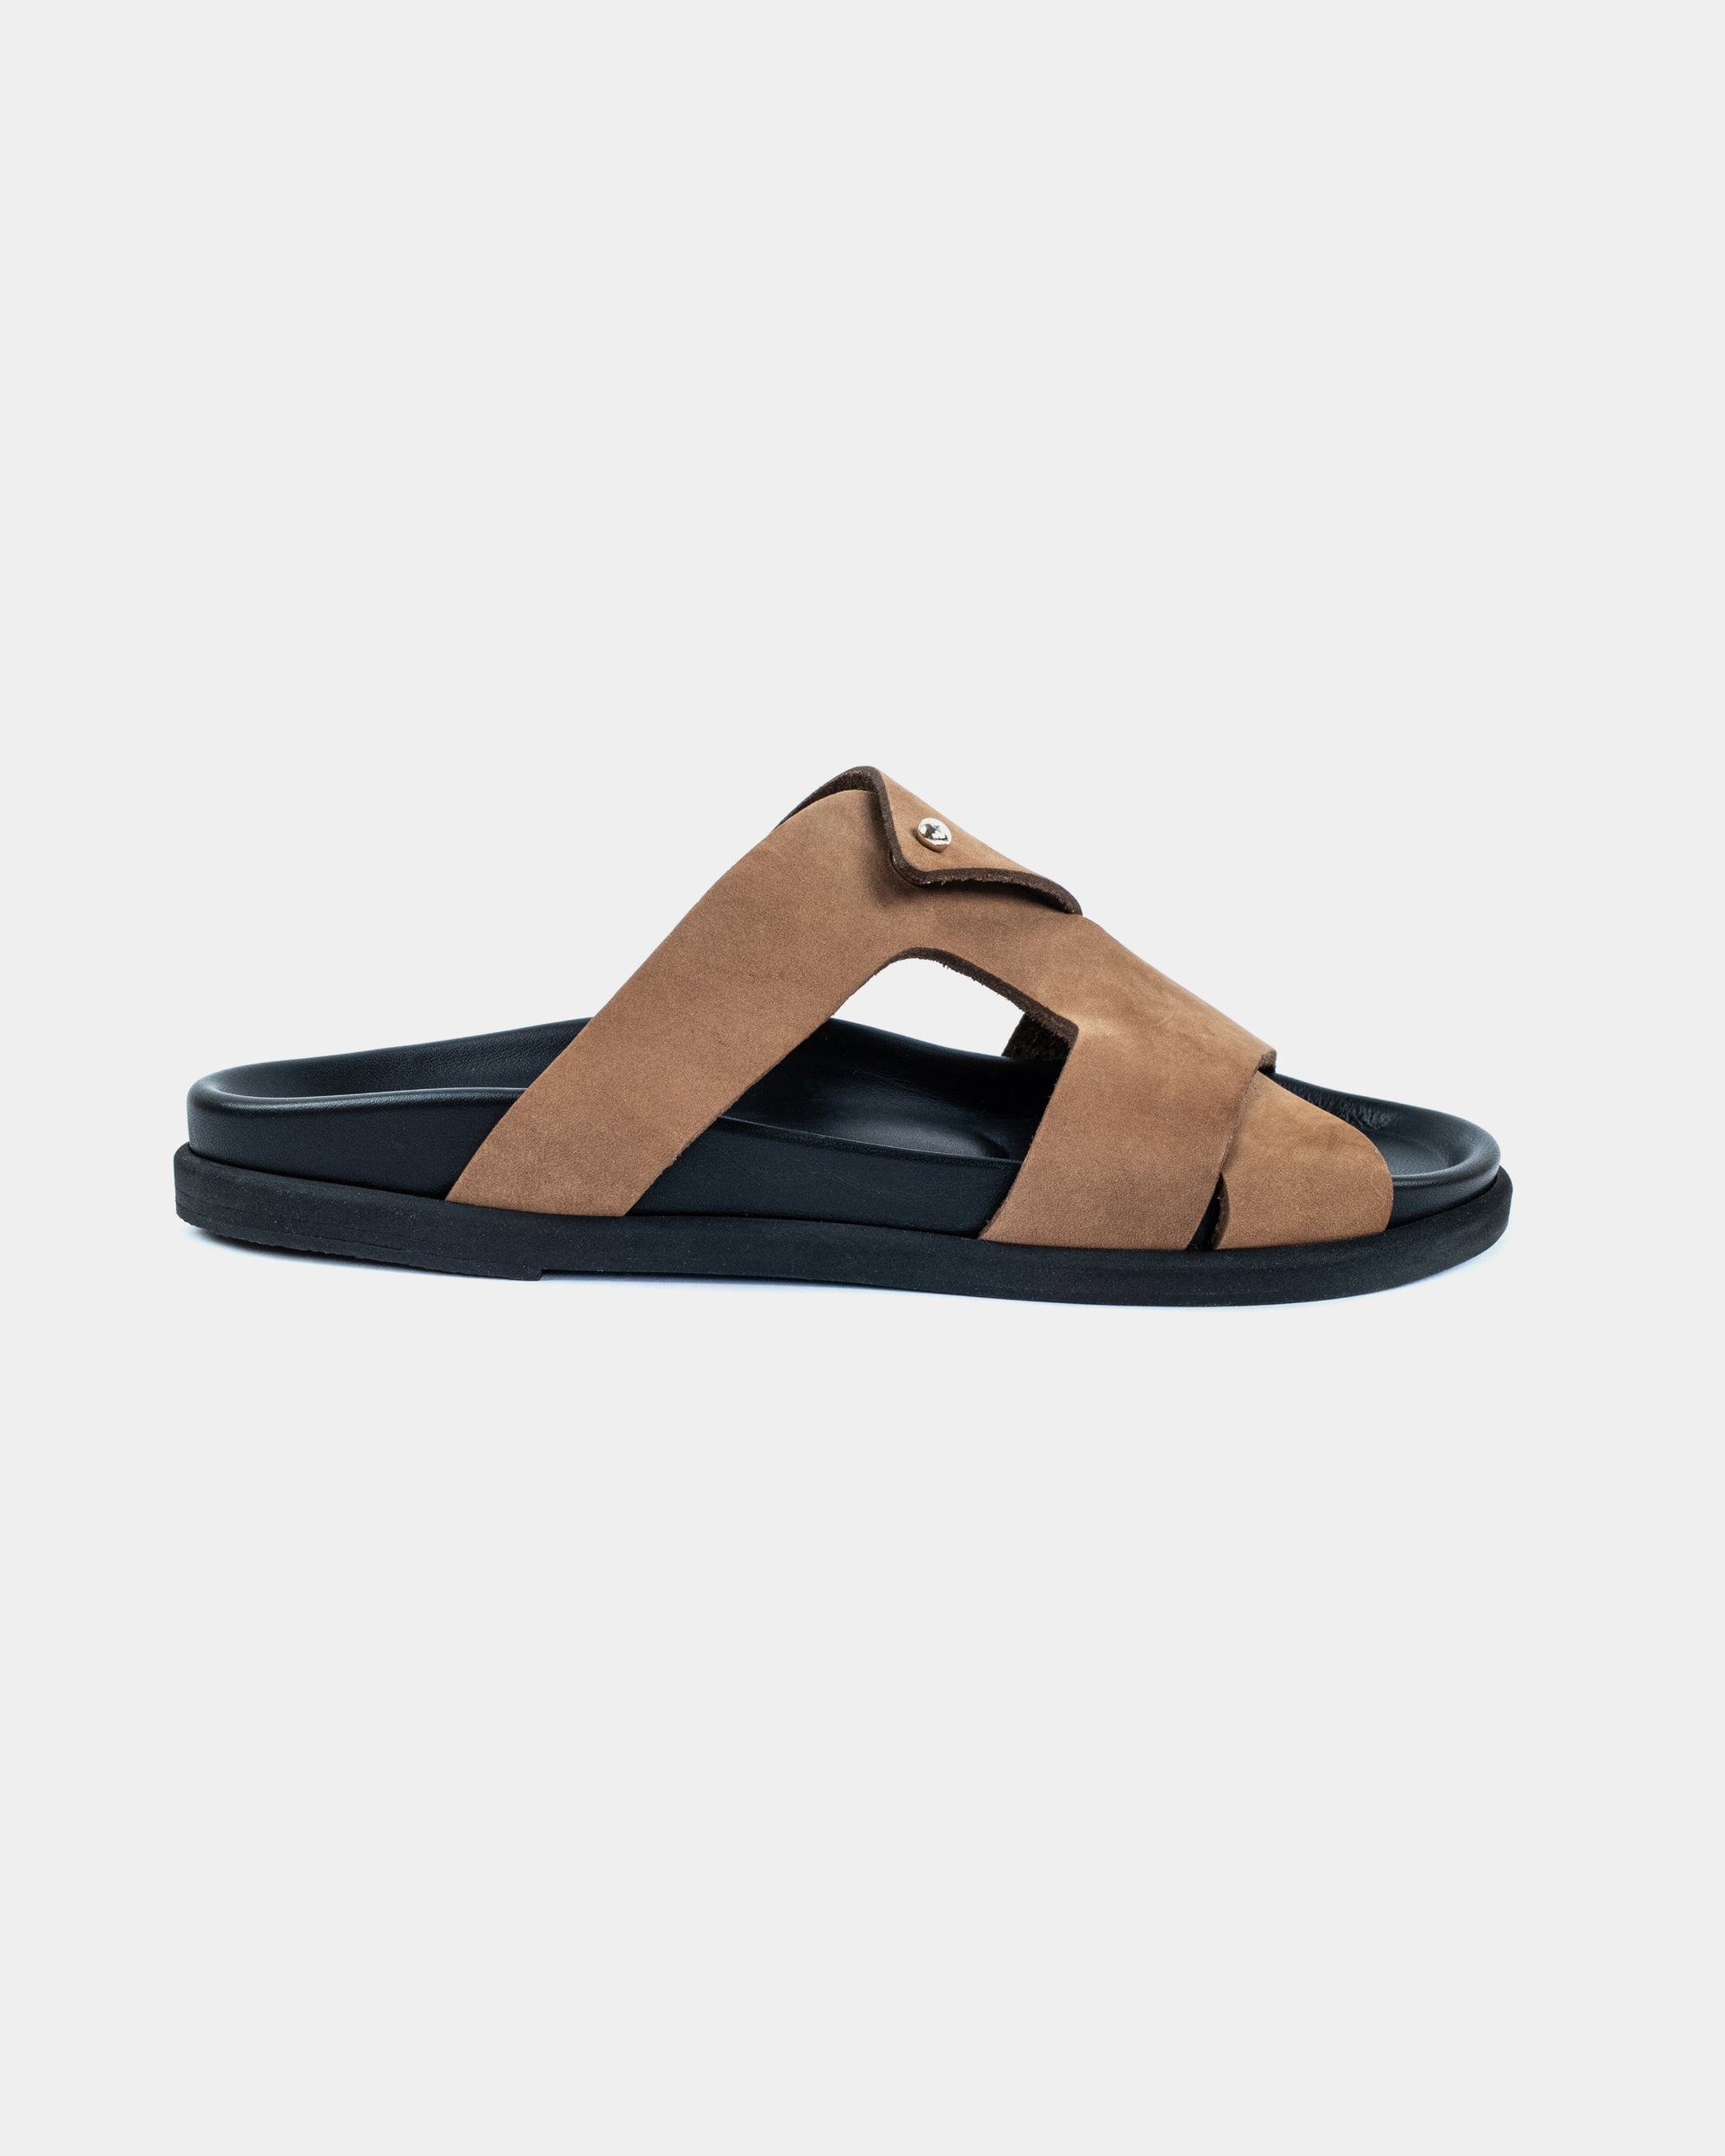 LEATHER SANDALS-FLAT SANDALS-KYMA SANDALS-STRAPPY SANDALS-LIGHT BROWN